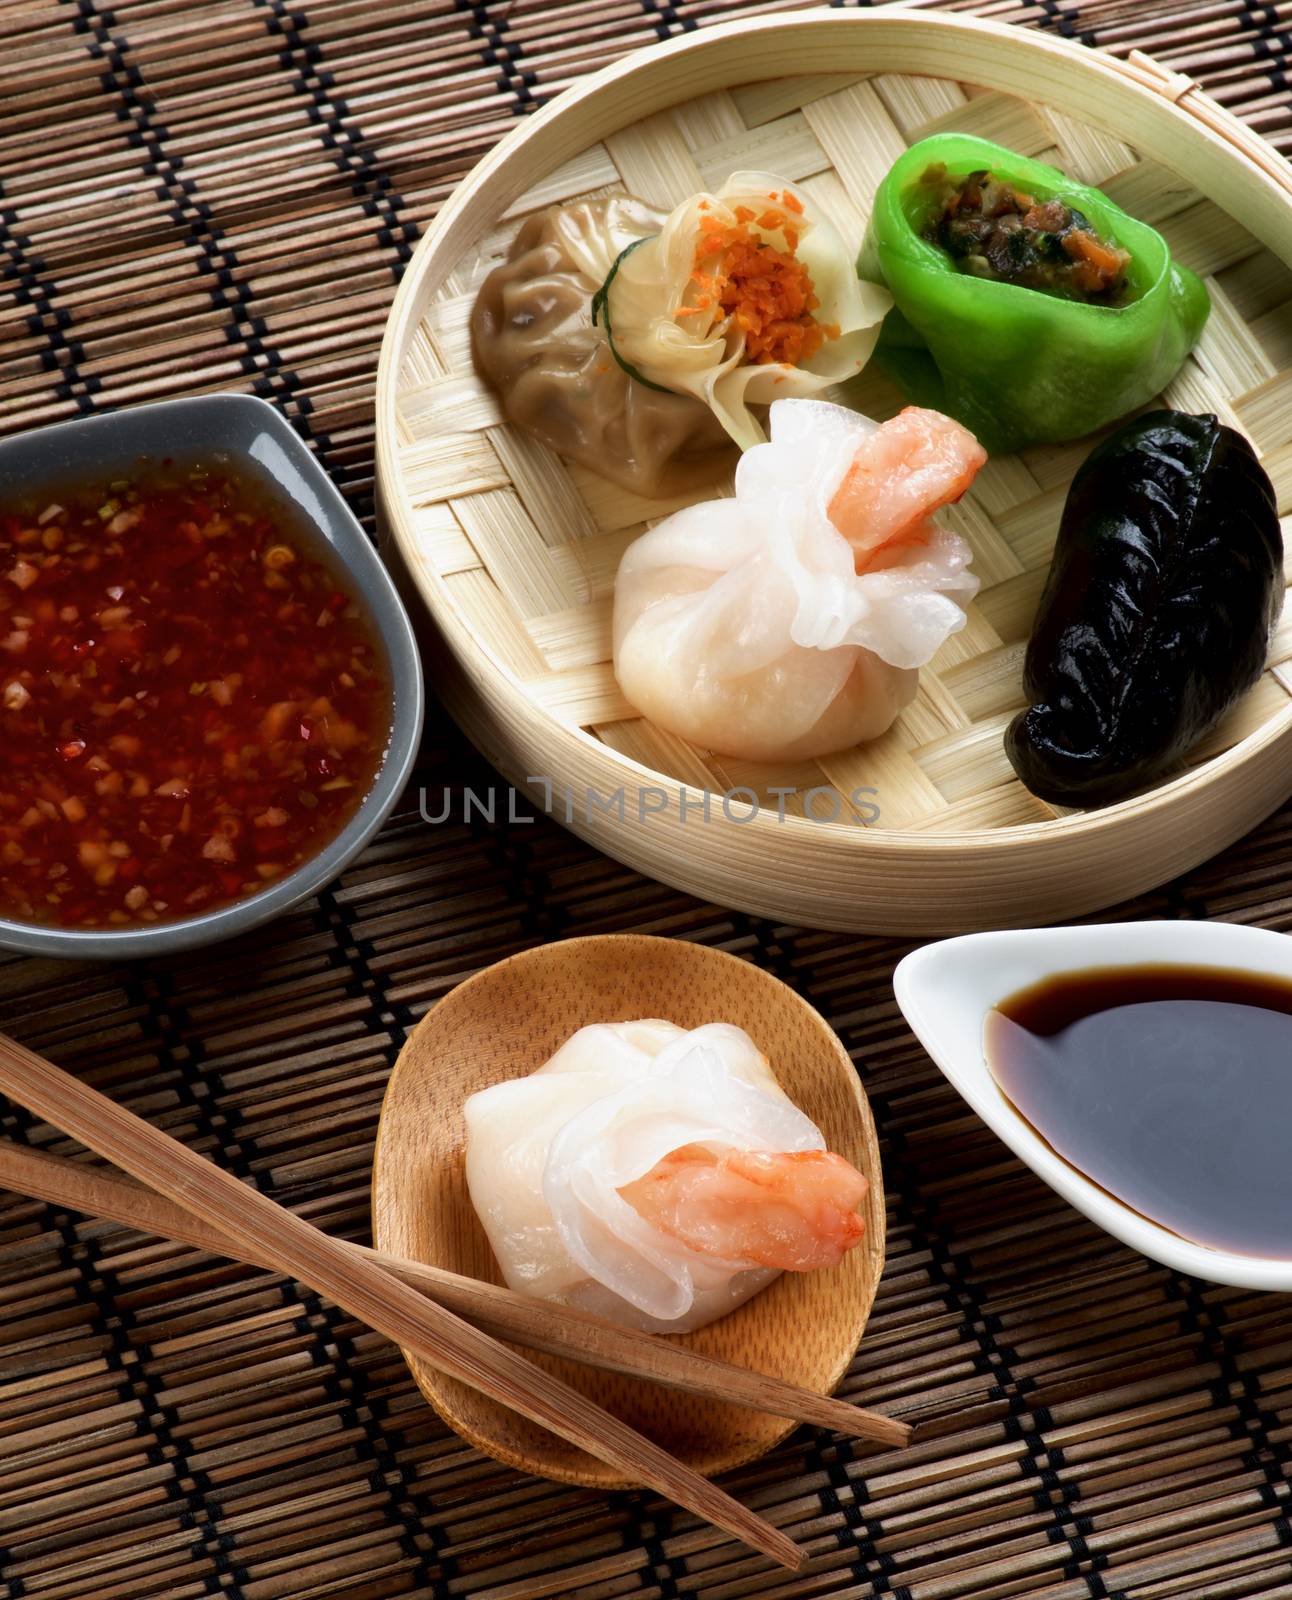 Assorted Dim Sum in Bamboo Steamed Bowl and Tori with Shrimp on Wooden Plate with Red Chili and Soy Sauces and Chopsticks closeup on Straw Mat background